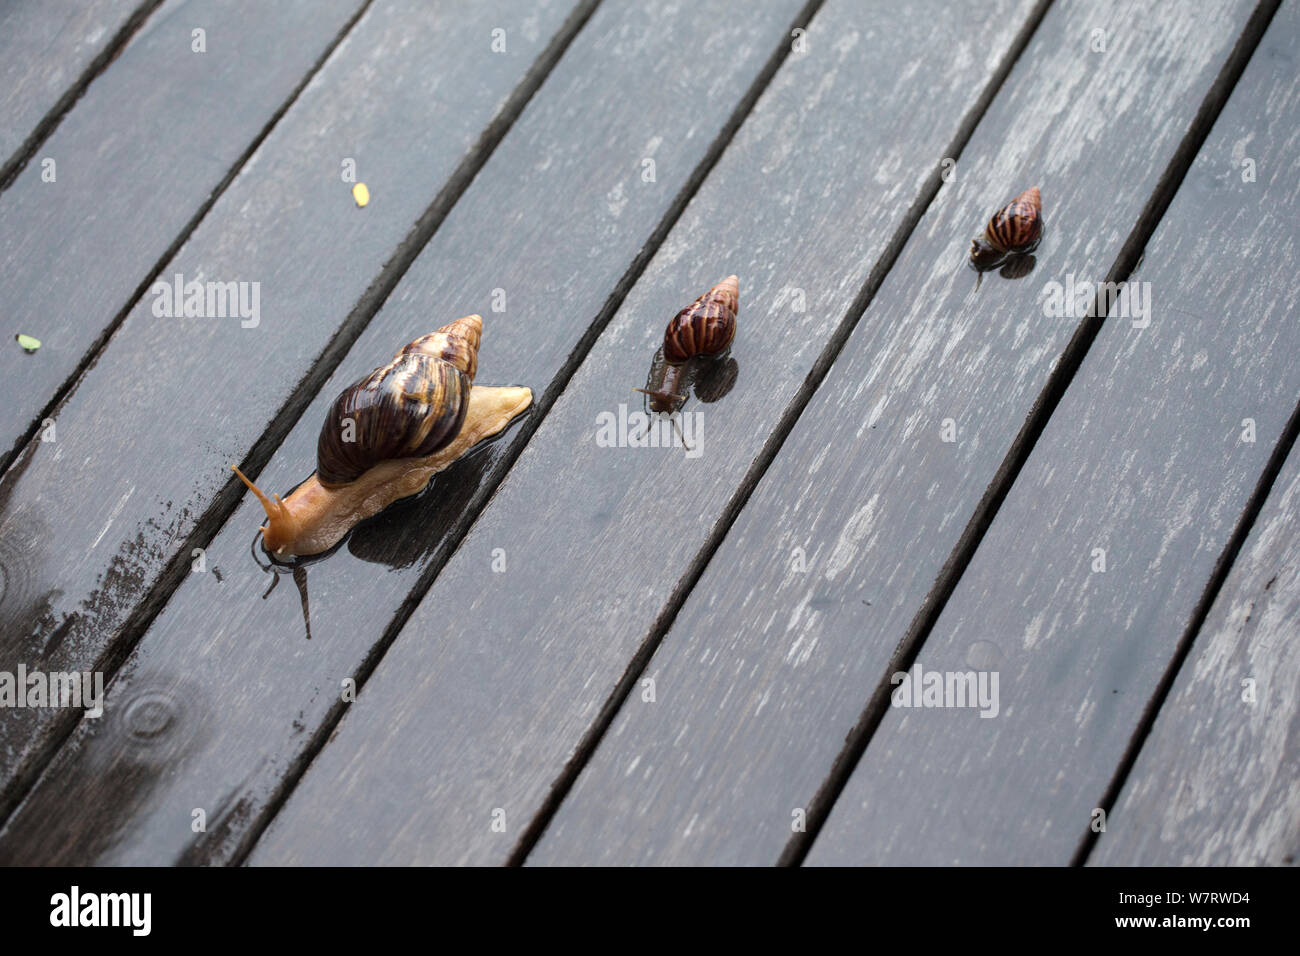 Three Giant African Land Snails (Achatina fulica) on wooden boards in the rain, Mahe, Seychelles, May Stock Photo